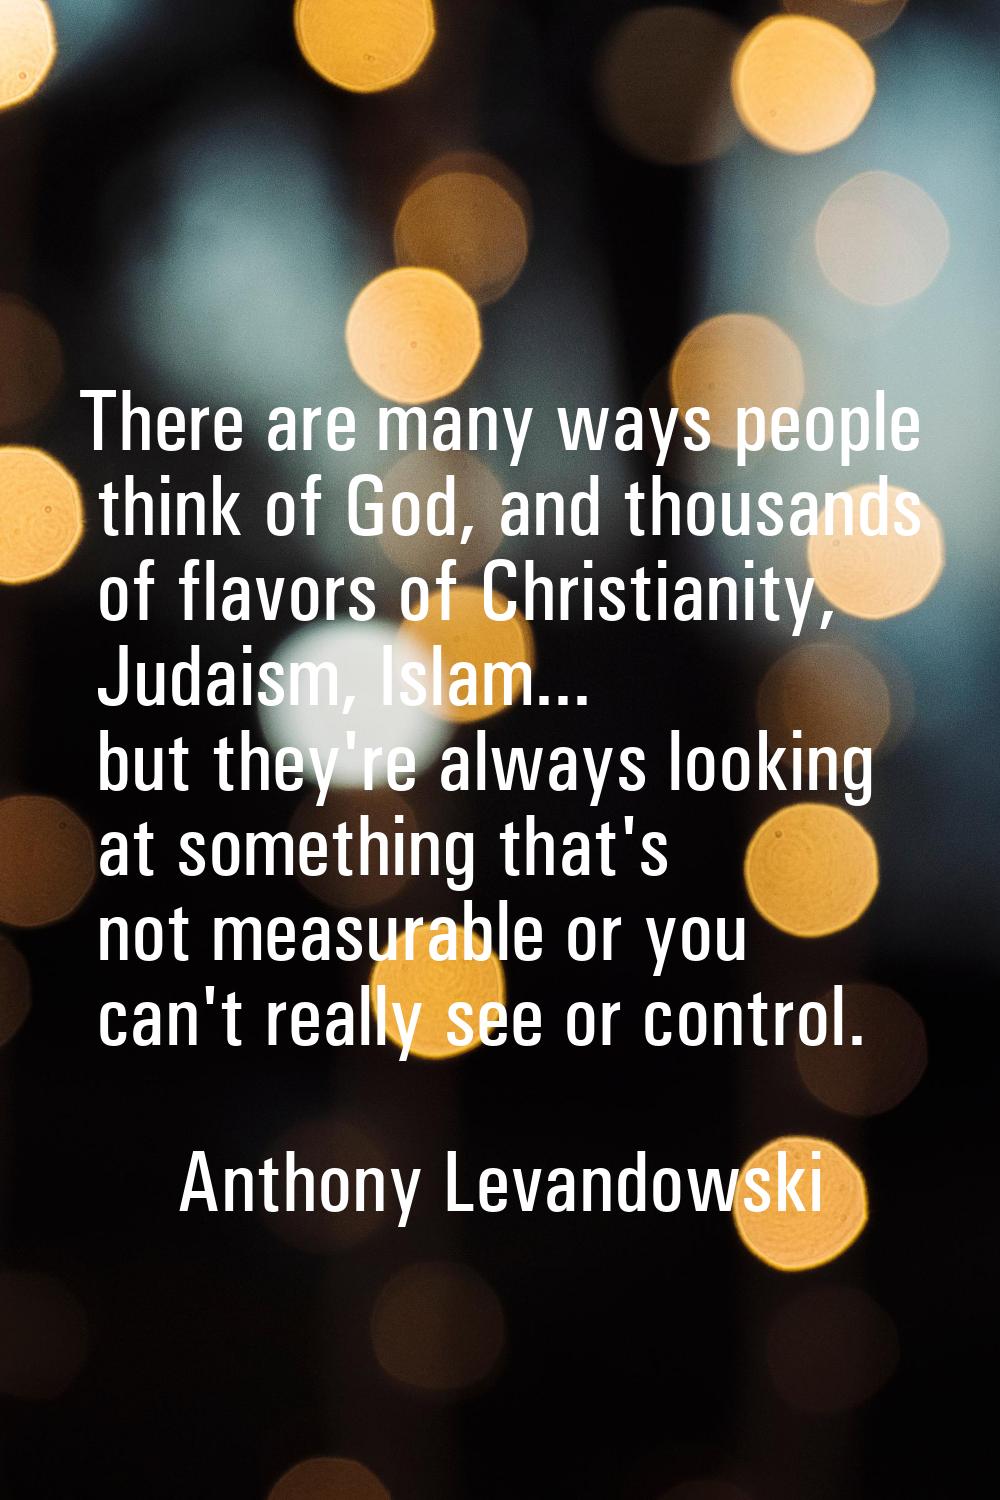 There are many ways people think of God, and thousands of flavors of Christianity, Judaism, Islam..